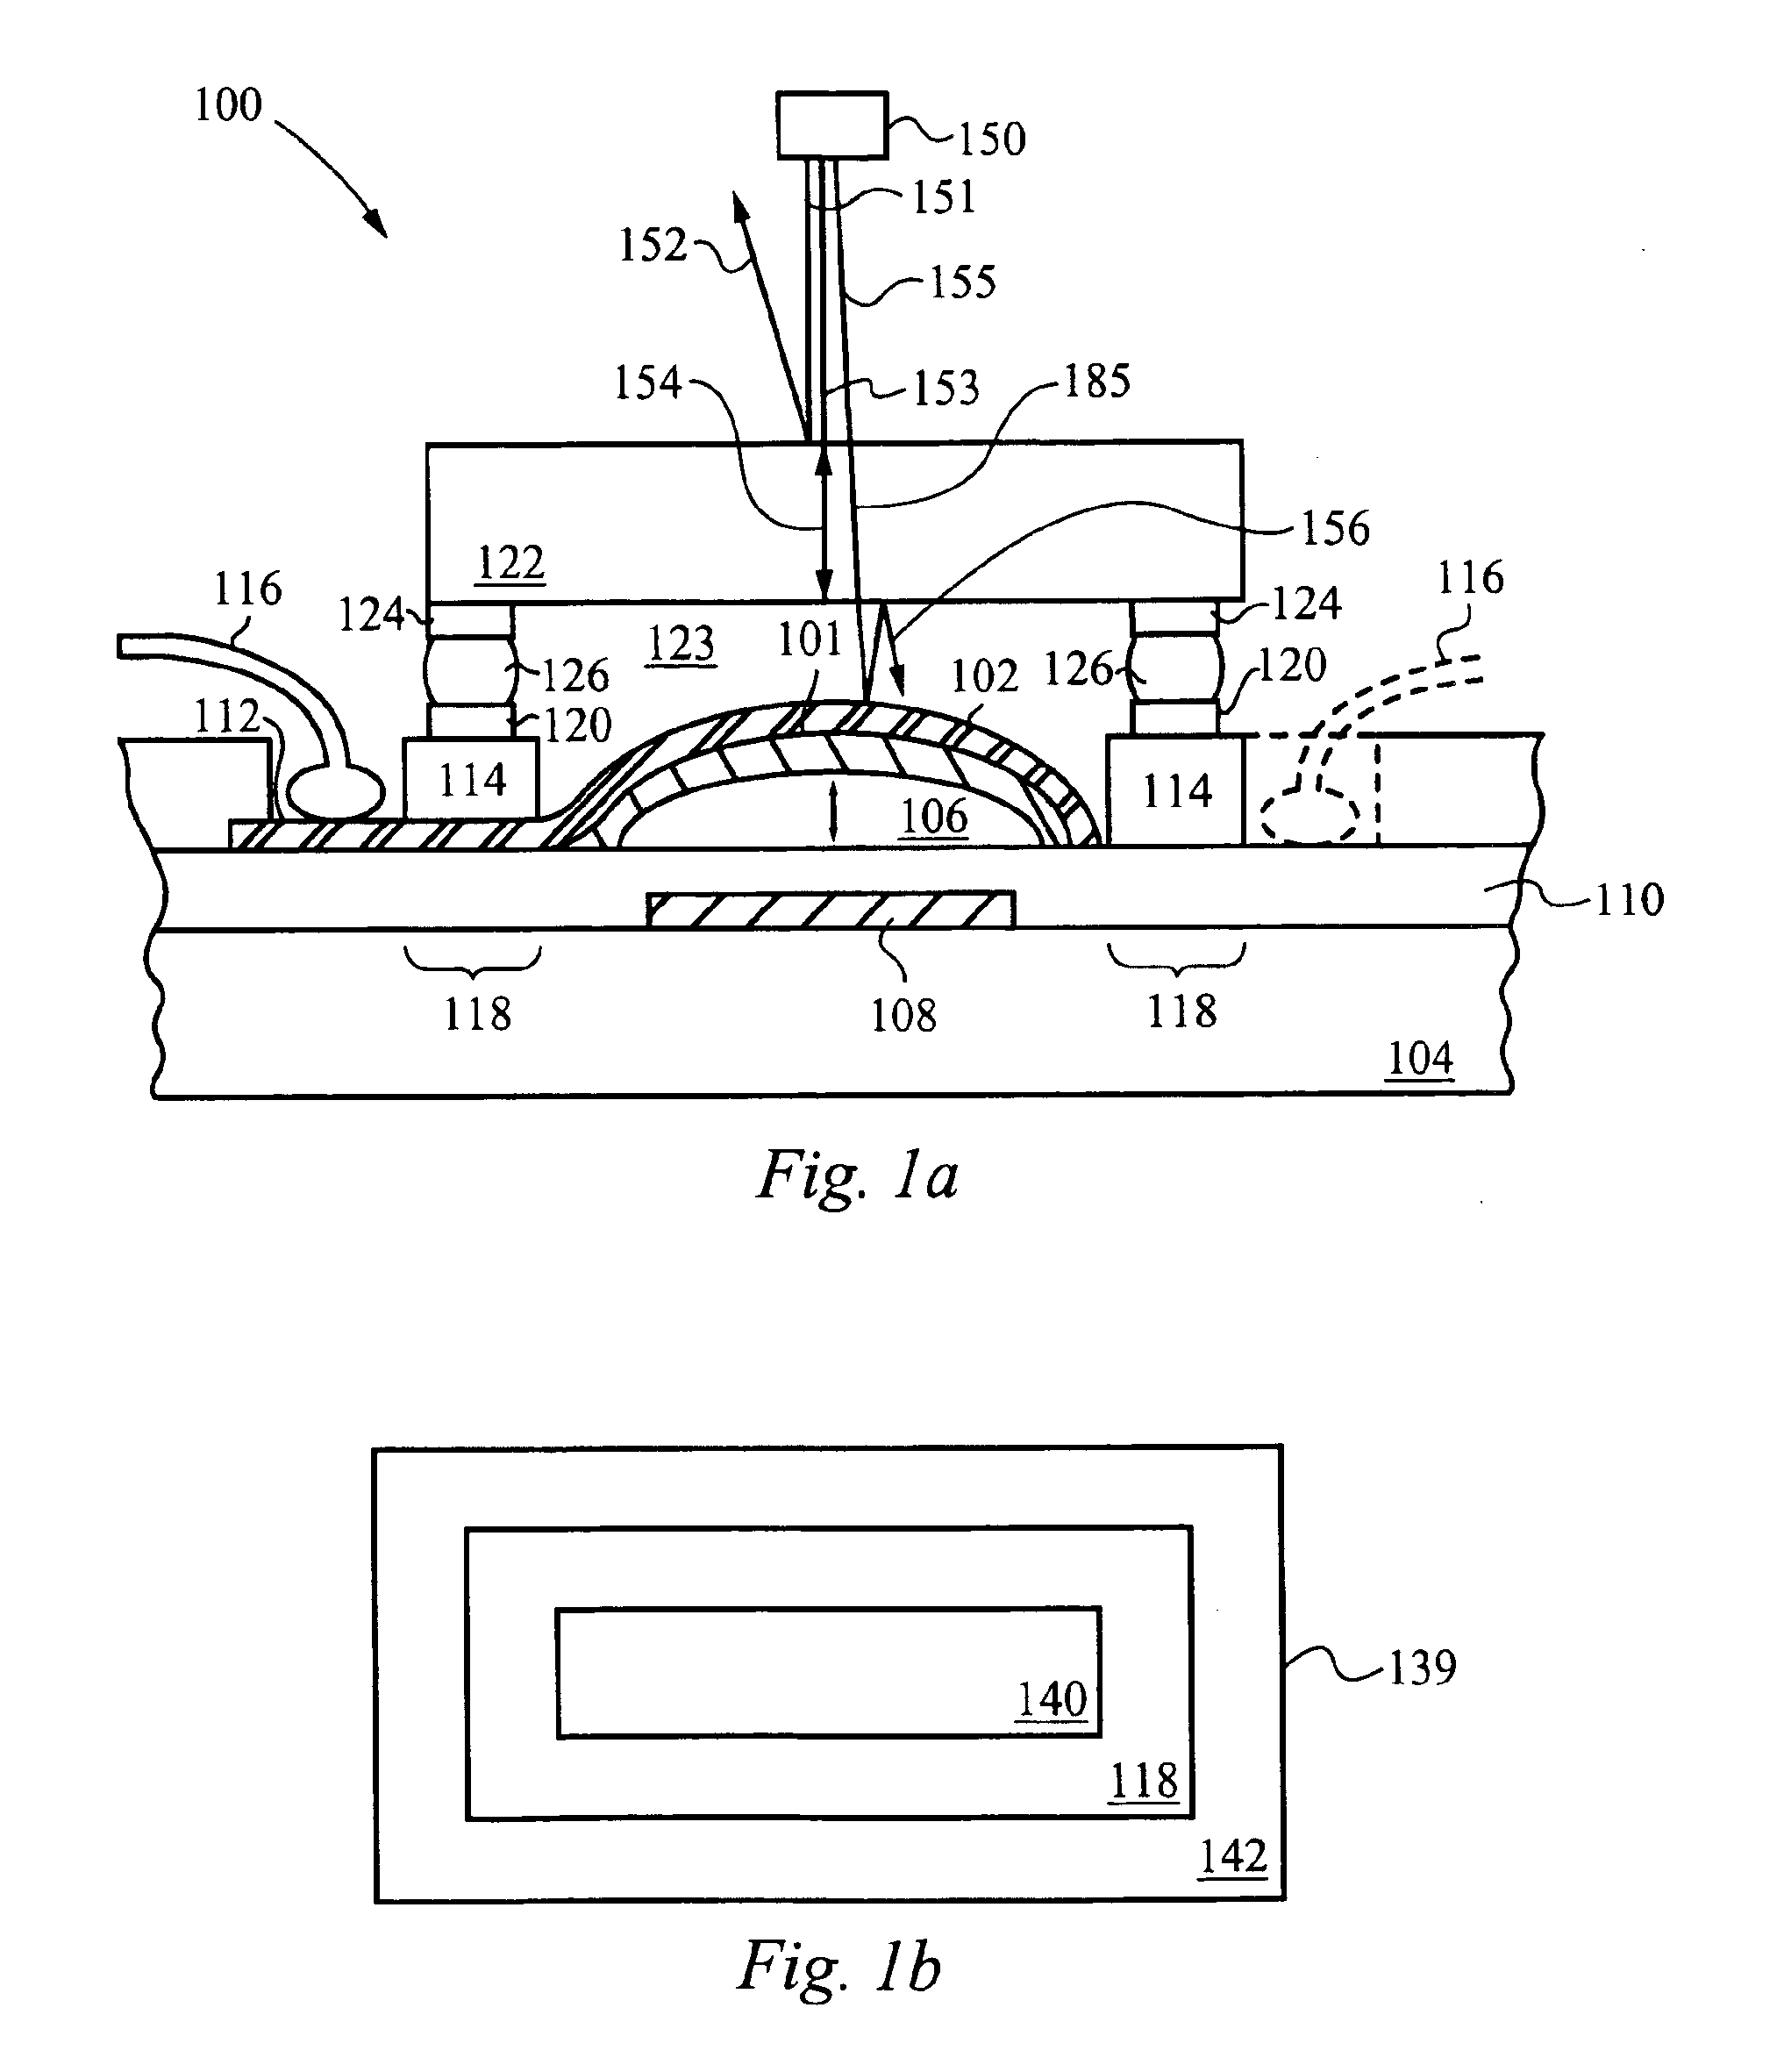 Method of sealing a hermetic lid to a semiconductor die at an angle